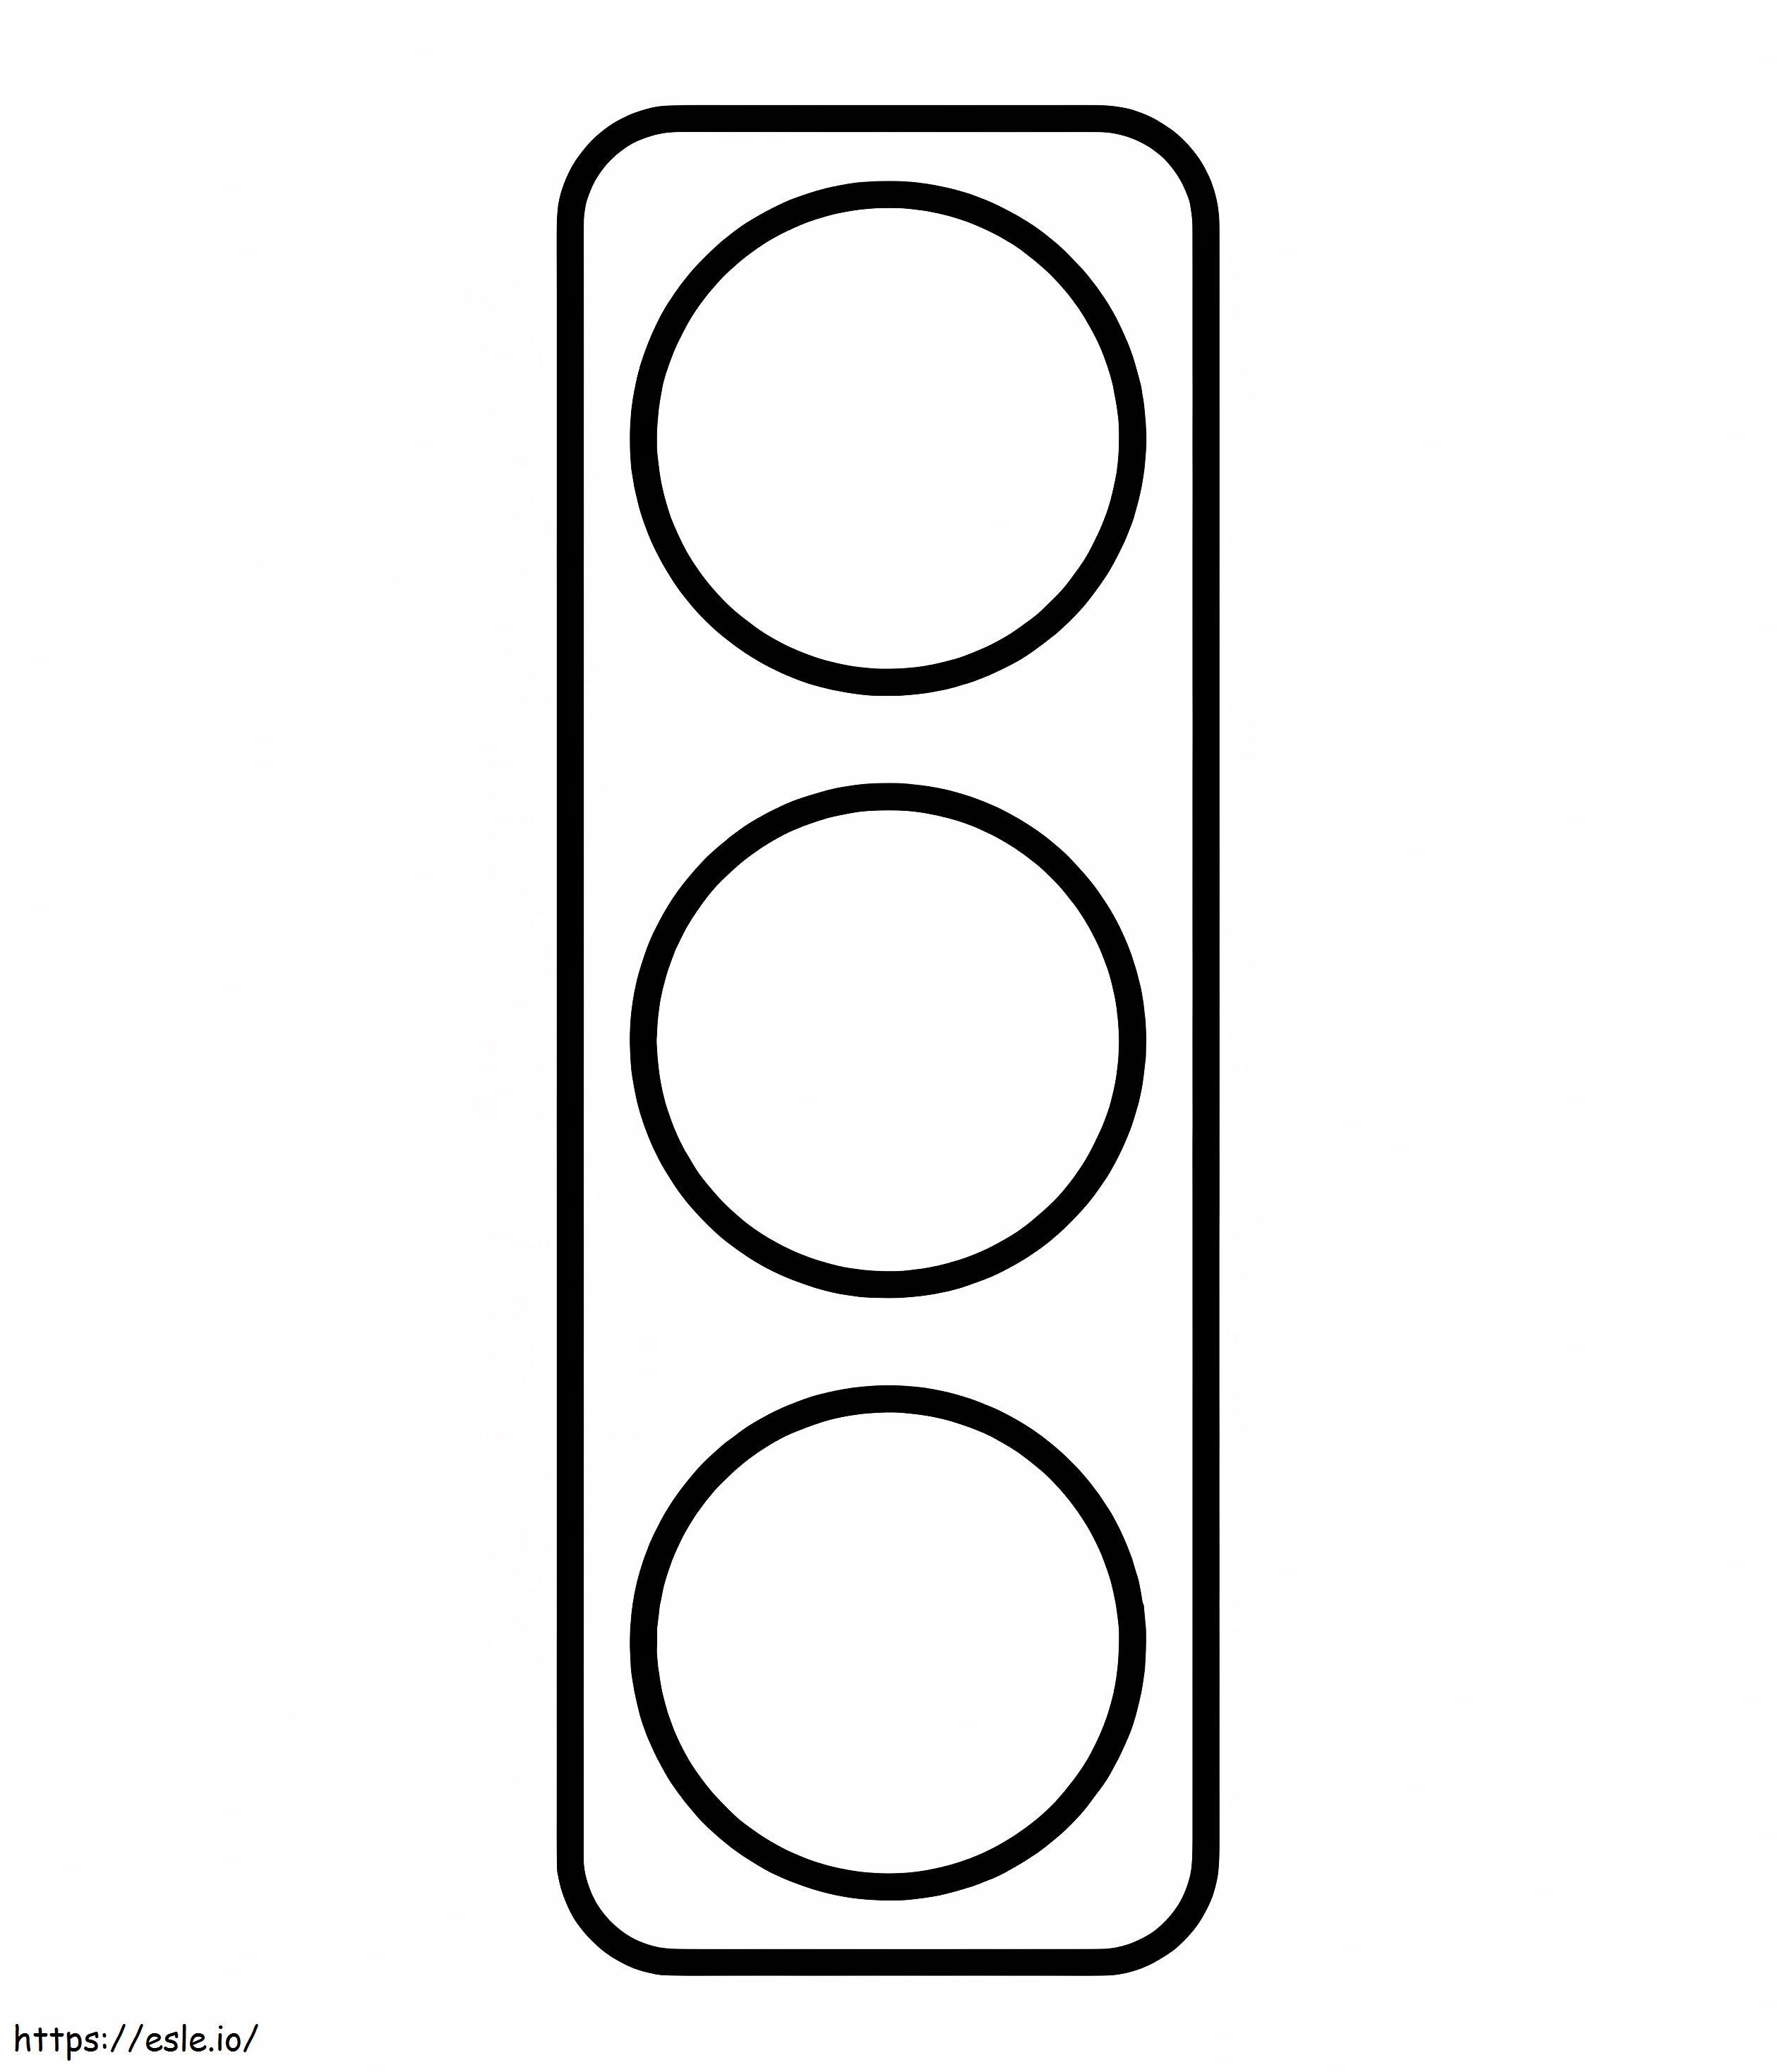 Great Traffic Light coloring page